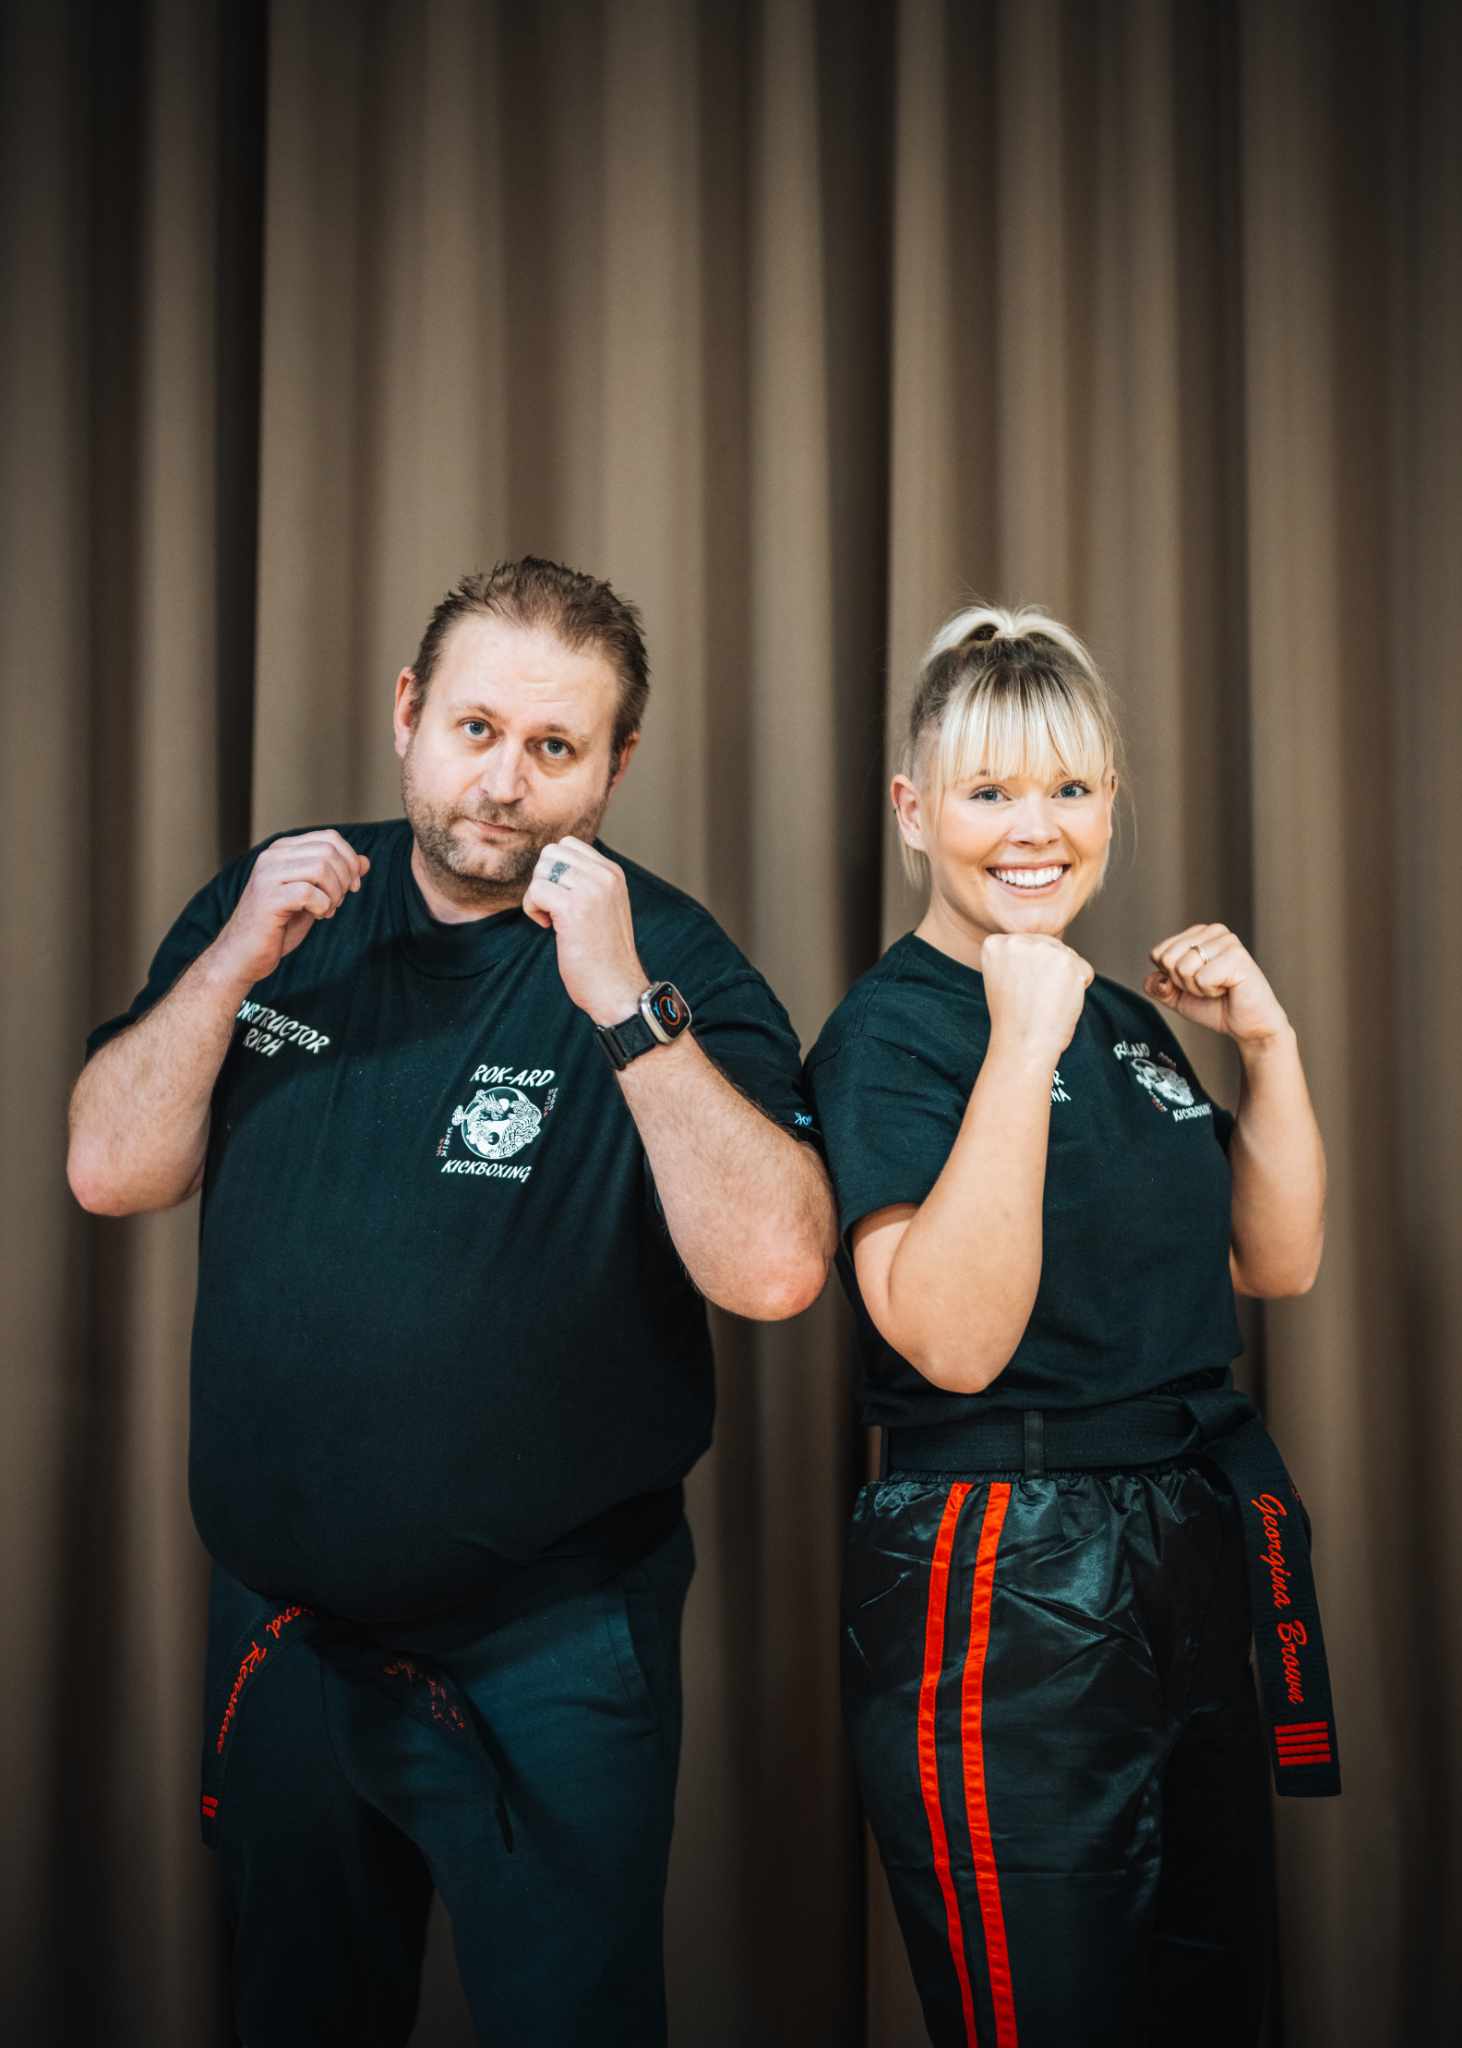 Sparring kickboxers to raise cash for youth activities